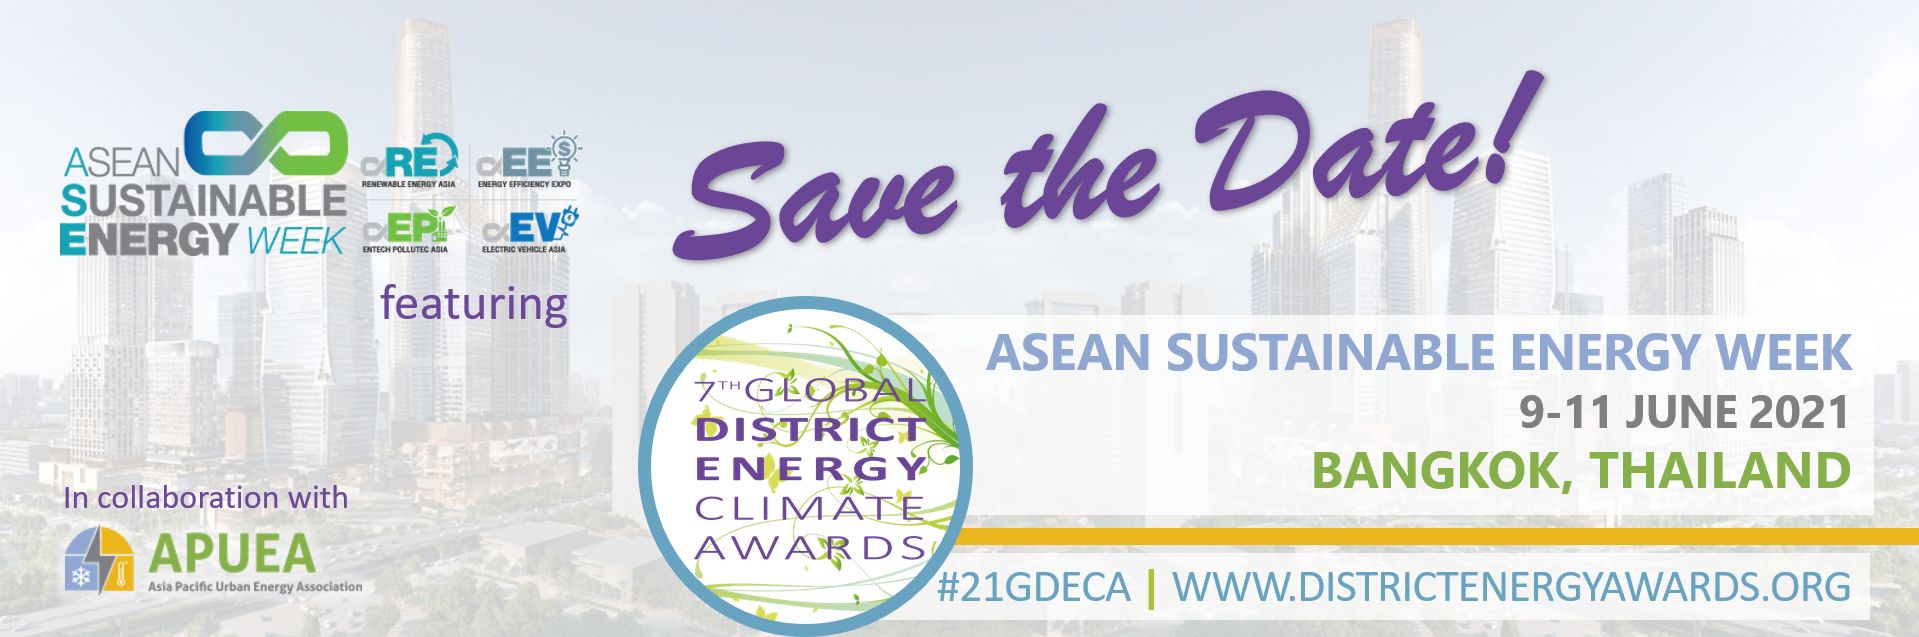 Save the date - 7th Global District Energy Climates Awards Ceremony - 11 June 2021 - Bangkok, Thailand